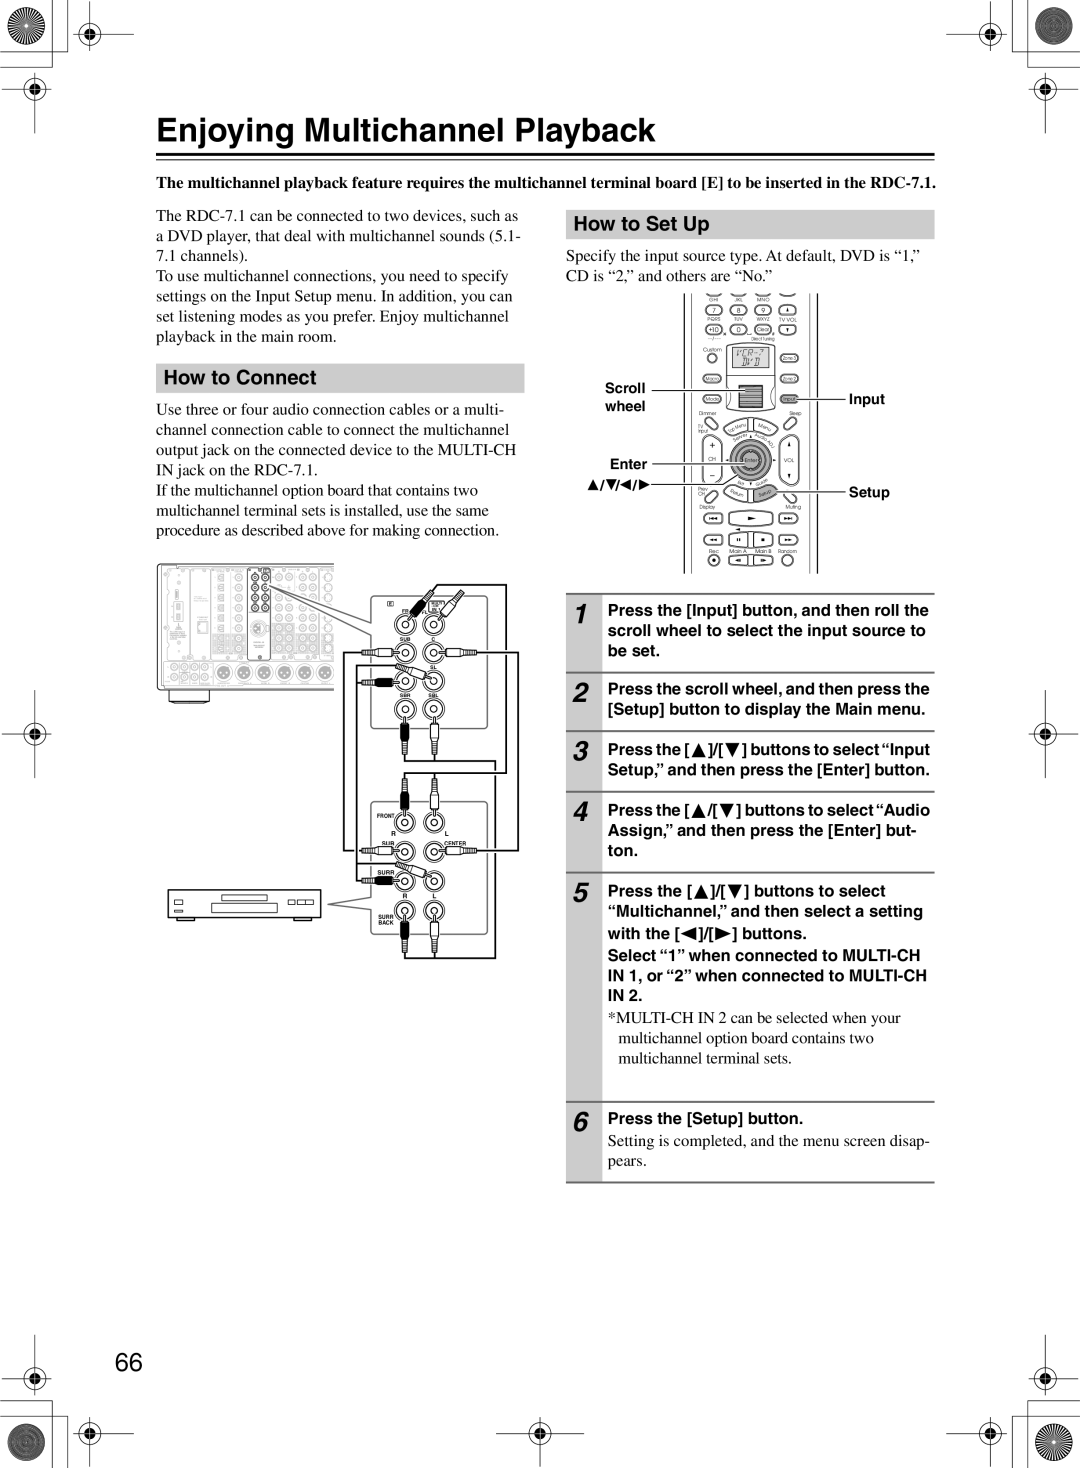 Integra RDC-7.1 instruction manual Enjoying Multichannel Playback, How to Set Up, How to Connect 